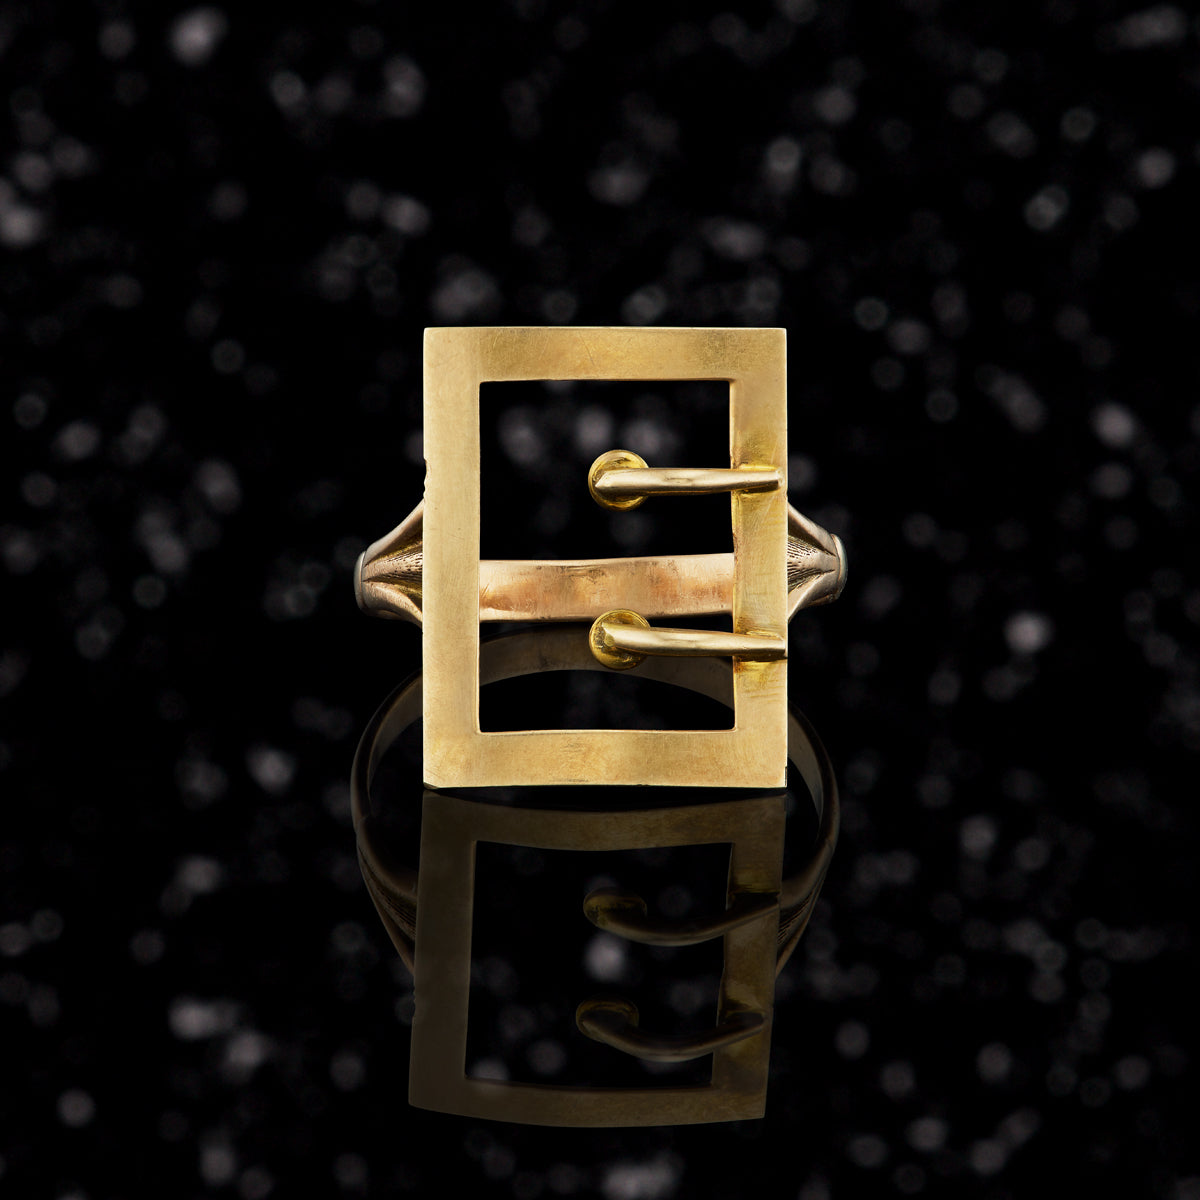 THE BUCKLE SIGNET RING